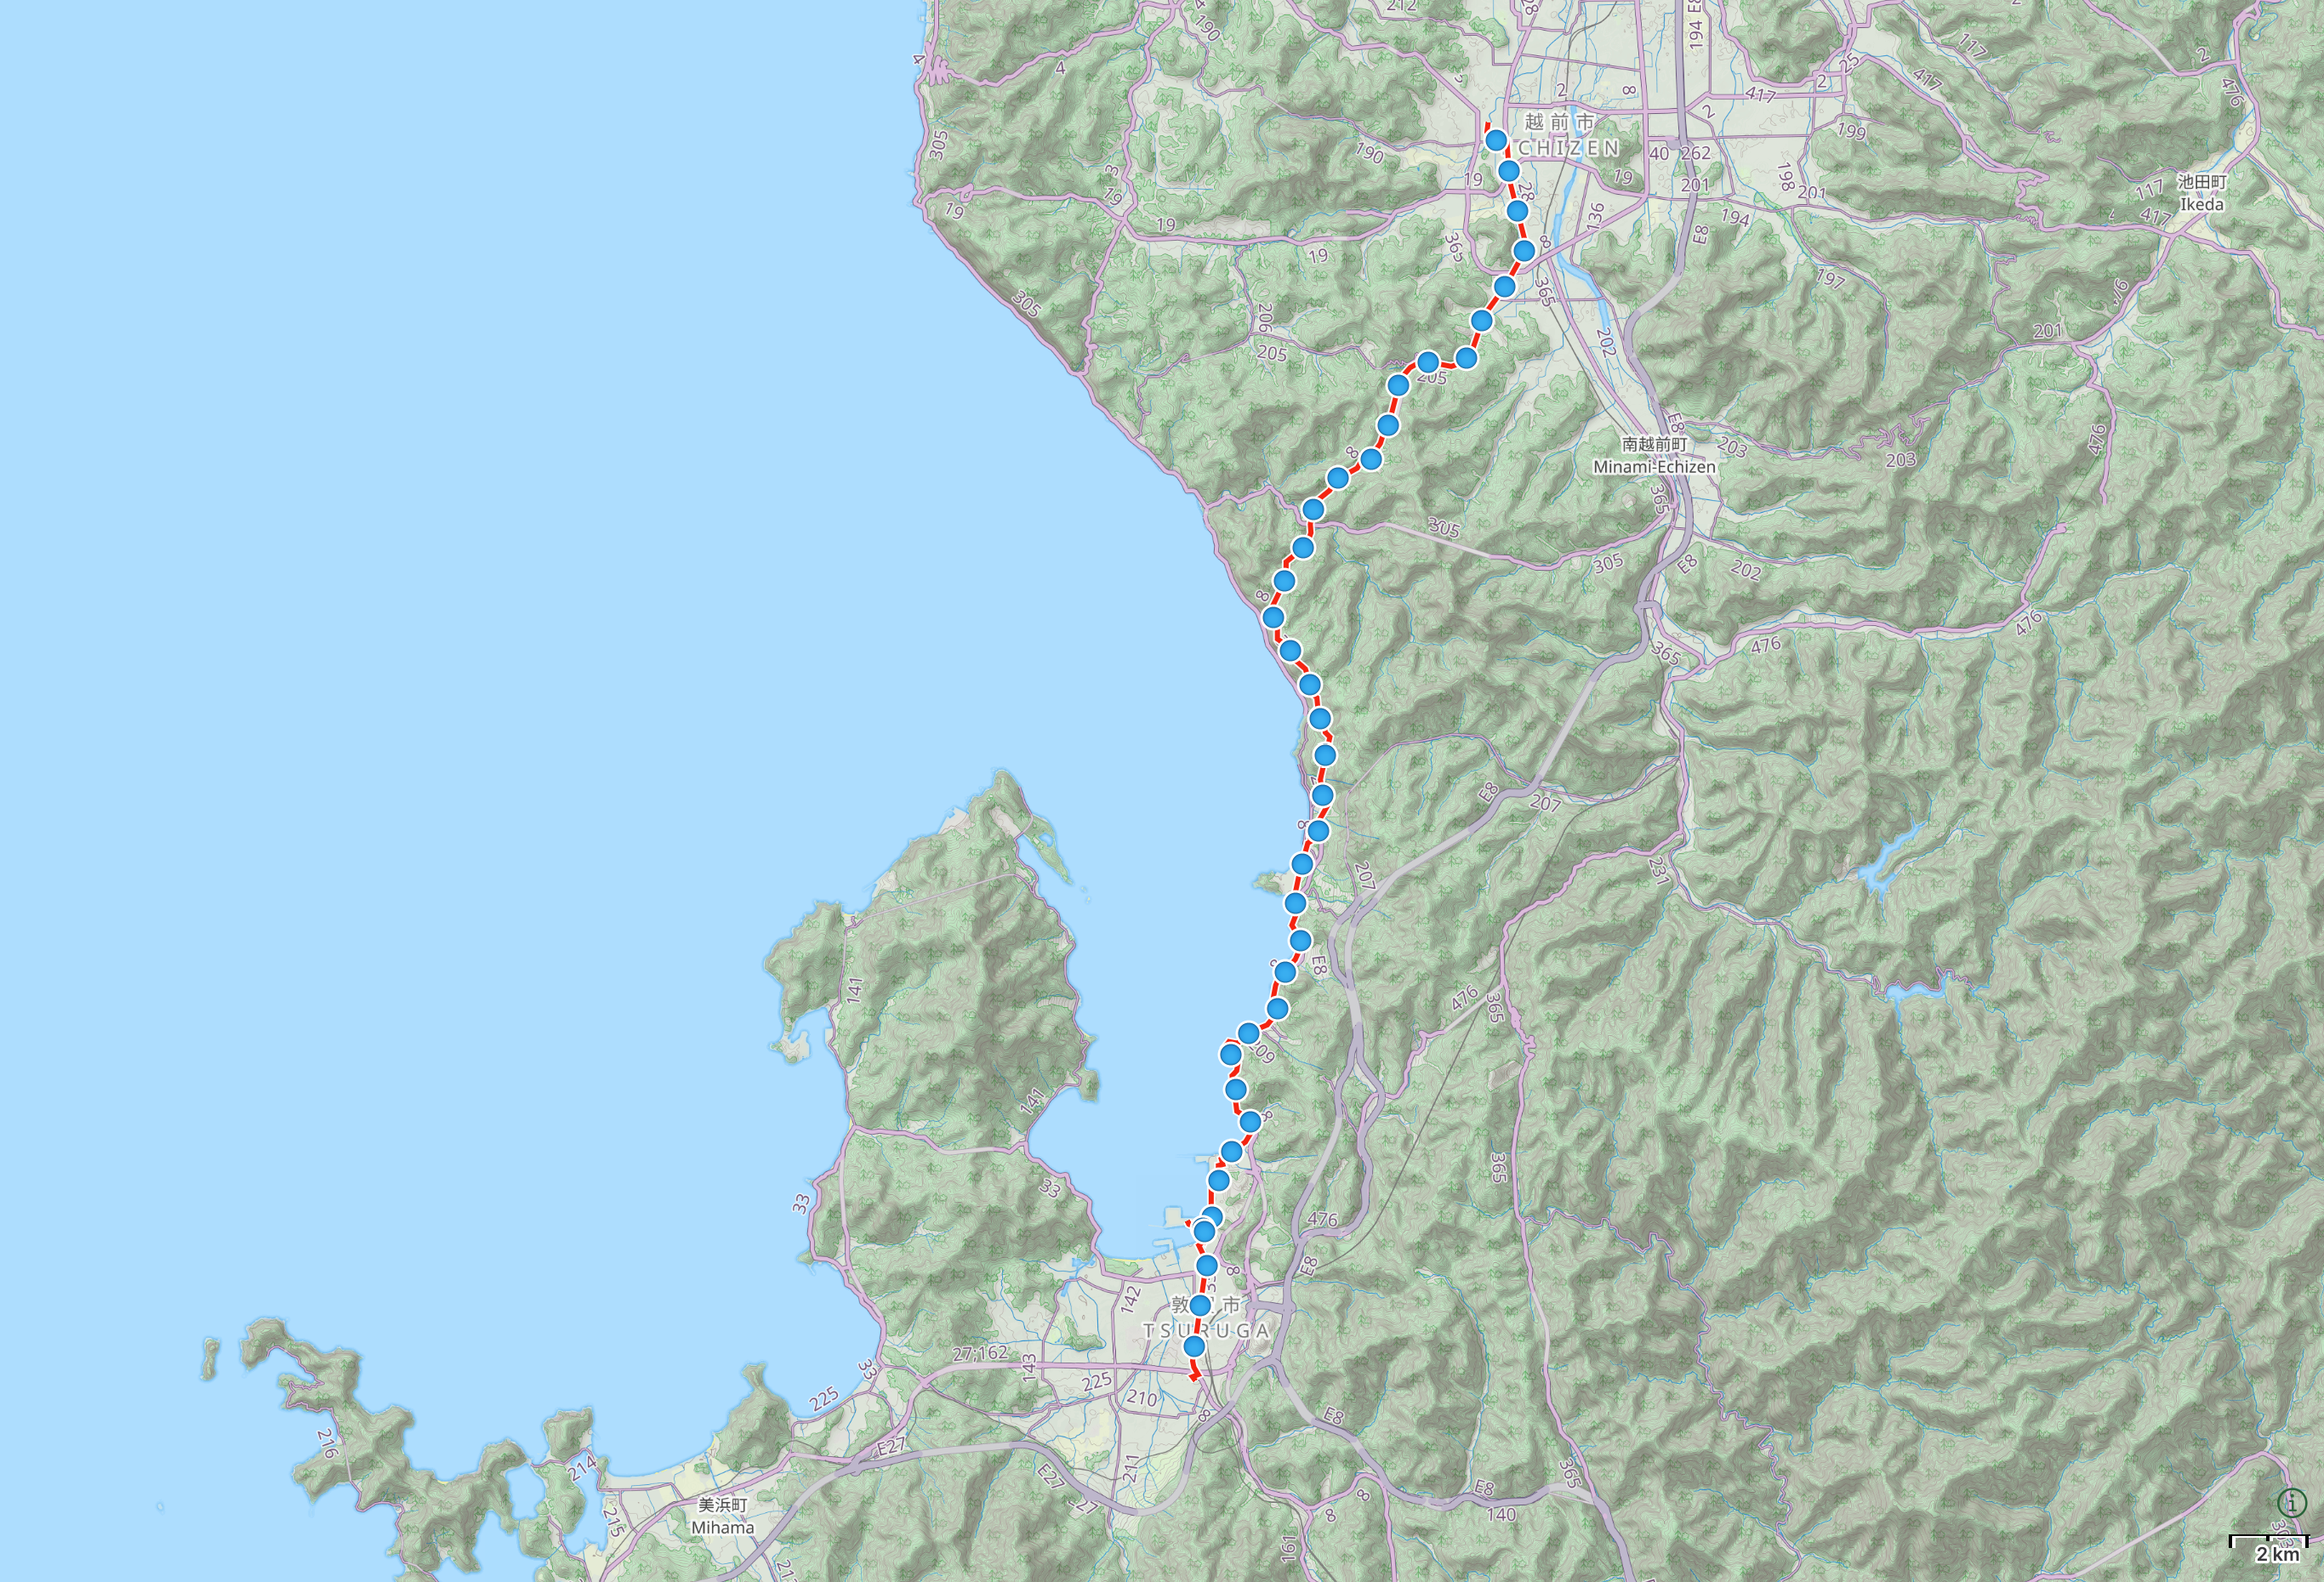 Map of Fukui Prefecture with author’s route between Tsuruga and Echizen highlighted.